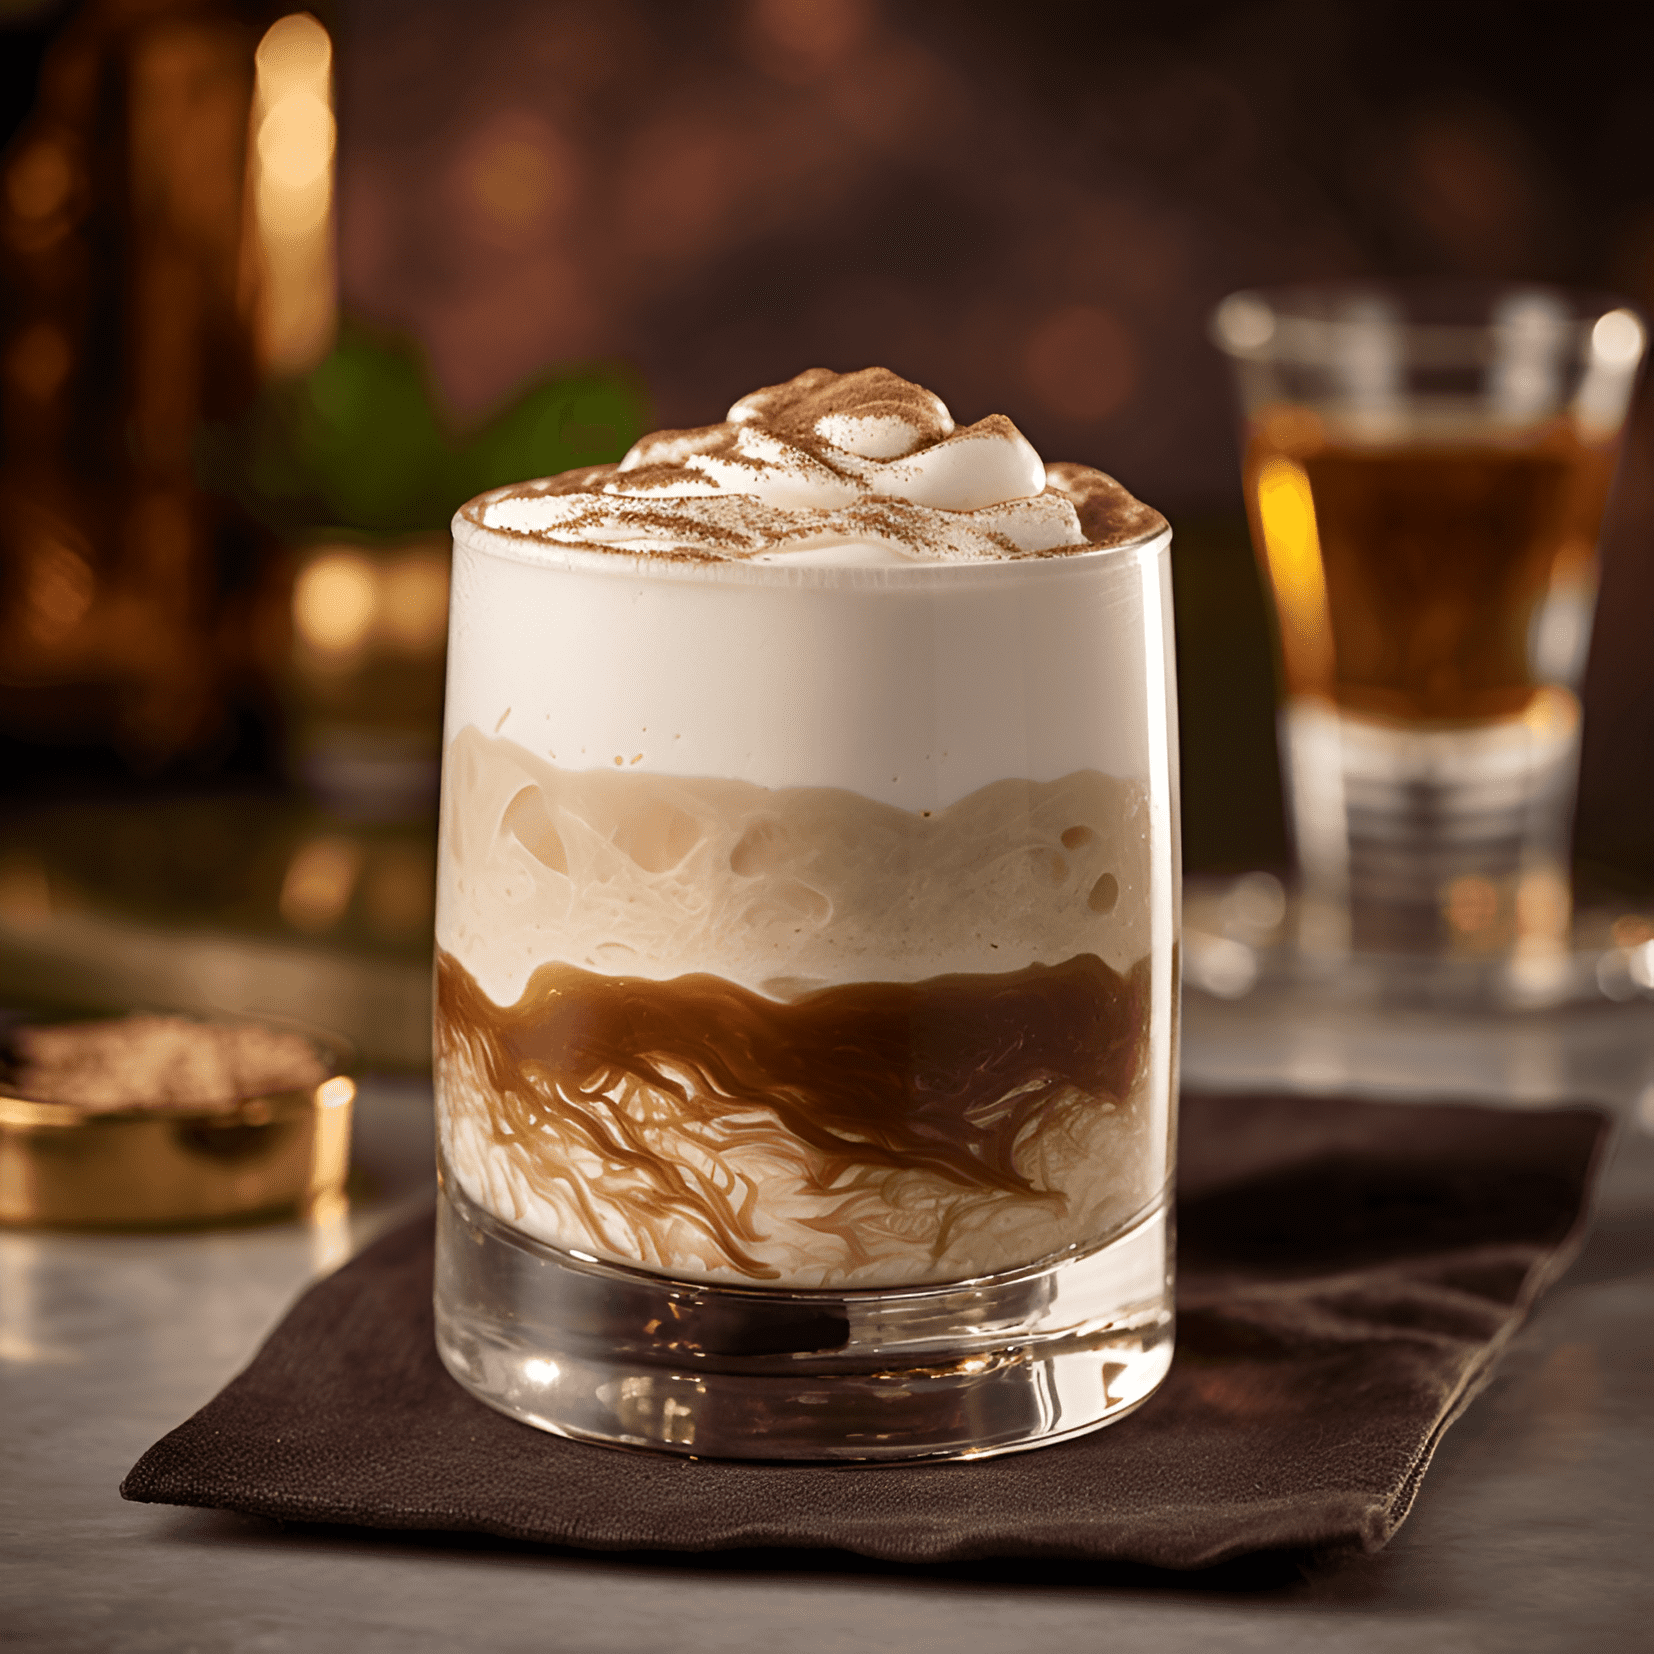 The Nutty Irishman is a creamy, sweet, and rich cocktail with a smooth, velvety texture. The combination of Irish cream and hazelnut liqueur creates a delightful nutty flavor, while the whipped cream adds a luxurious, indulgent finish.